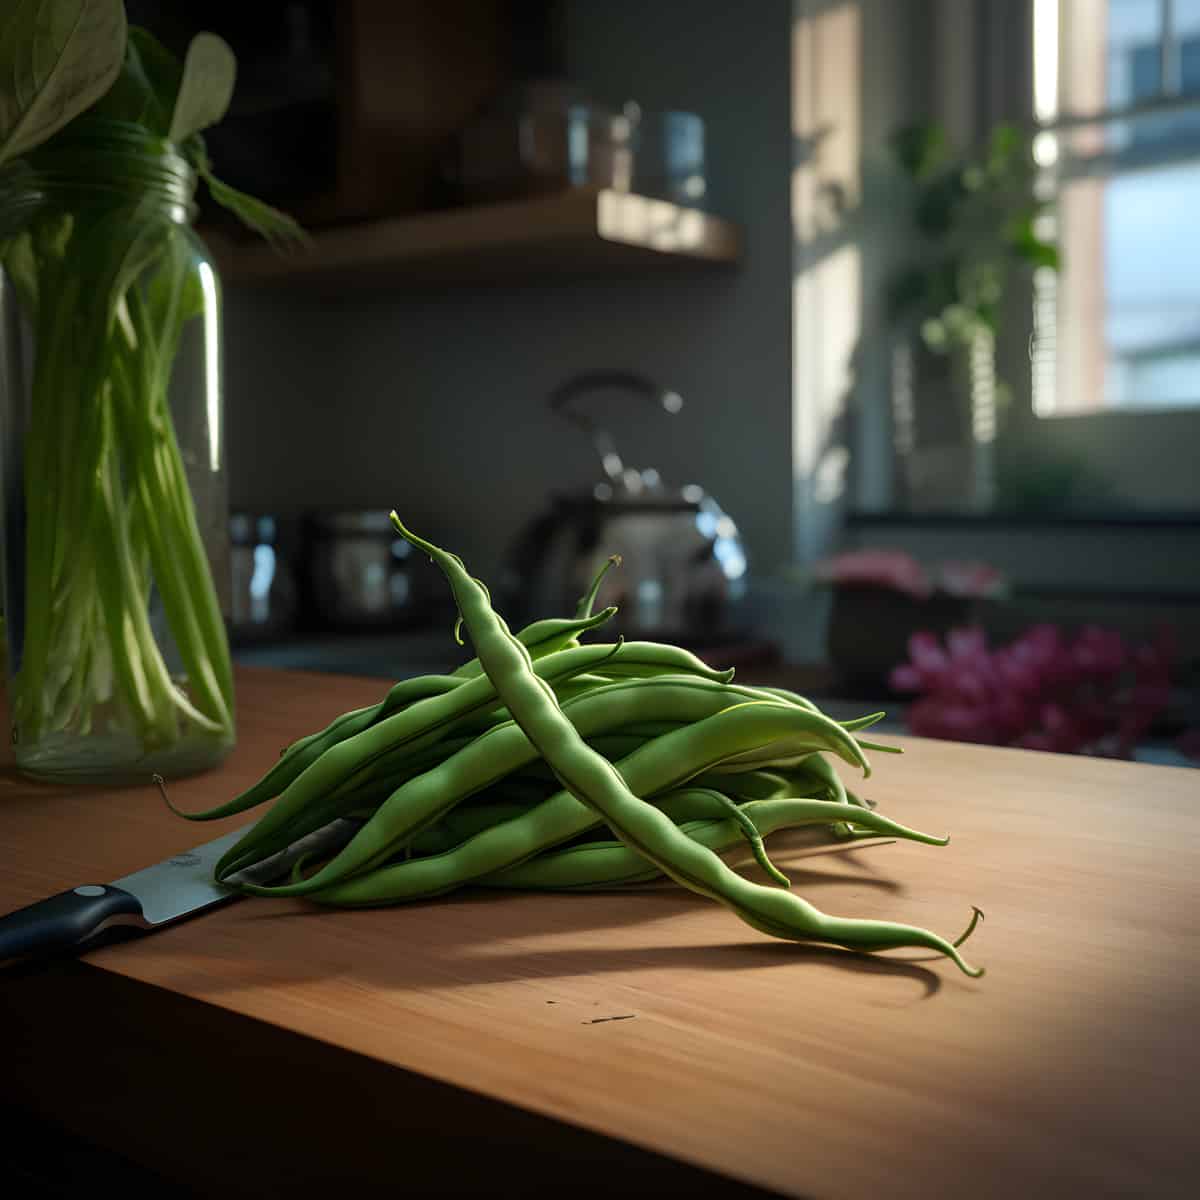 Sword Beans on a kitchen counter